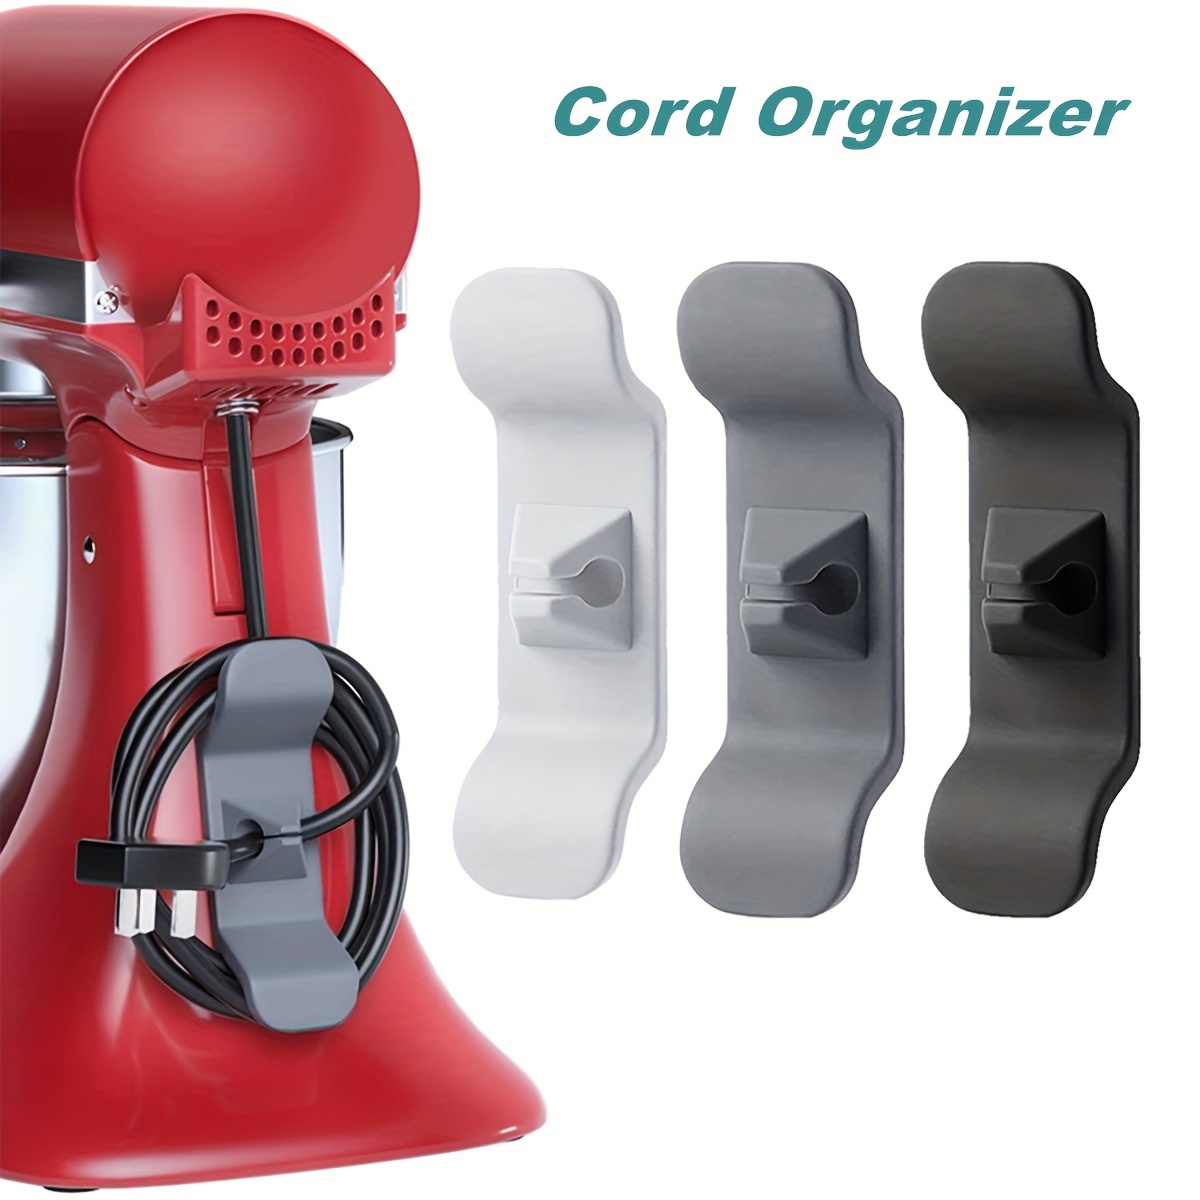 Cord Organizer for Kitchen Appliances, 3-PCS Cord Winder Cord Keeper Cord  Holder Cord Wrapper Premium Adhesive Stick on Stand Mixer, Blender,  Toaster